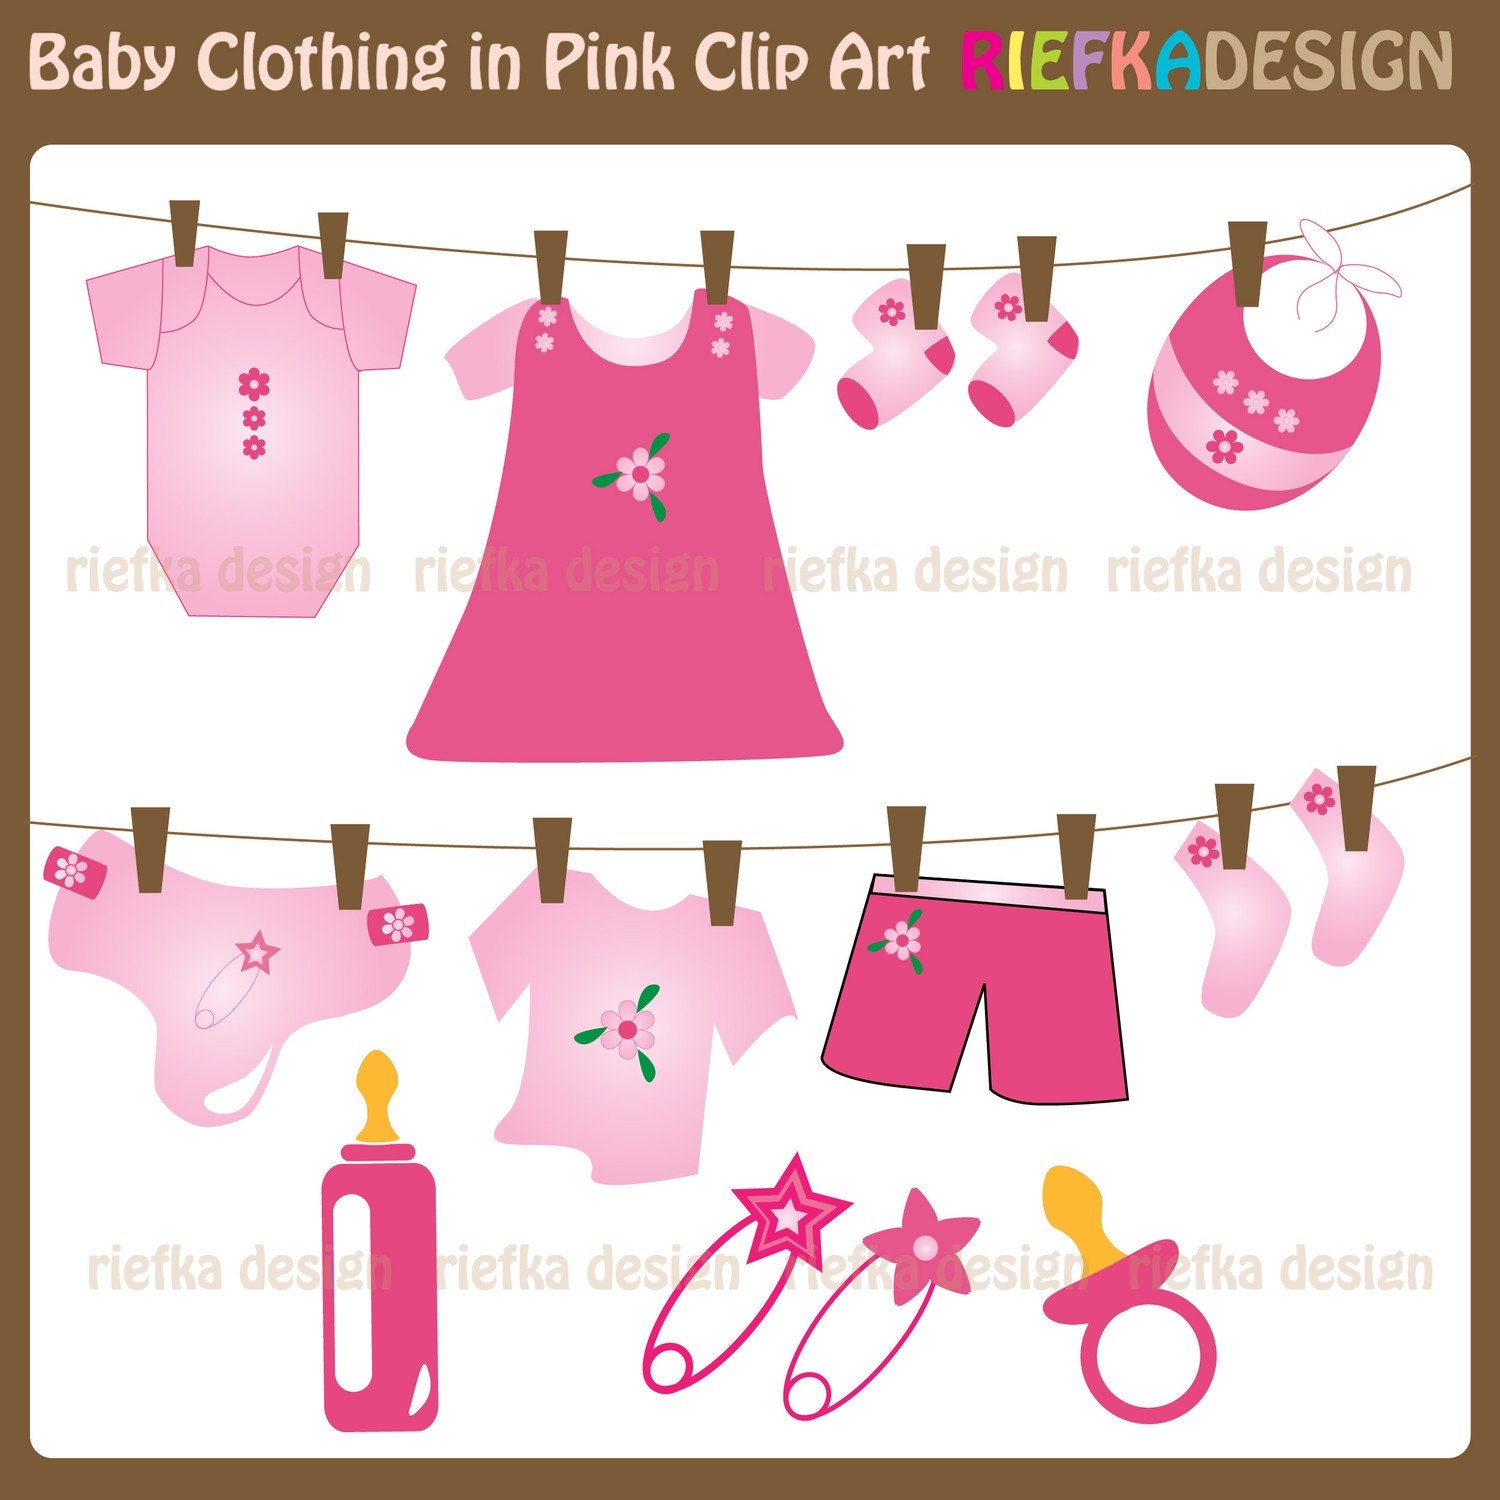 Baby Clothing in Pink Clip Art